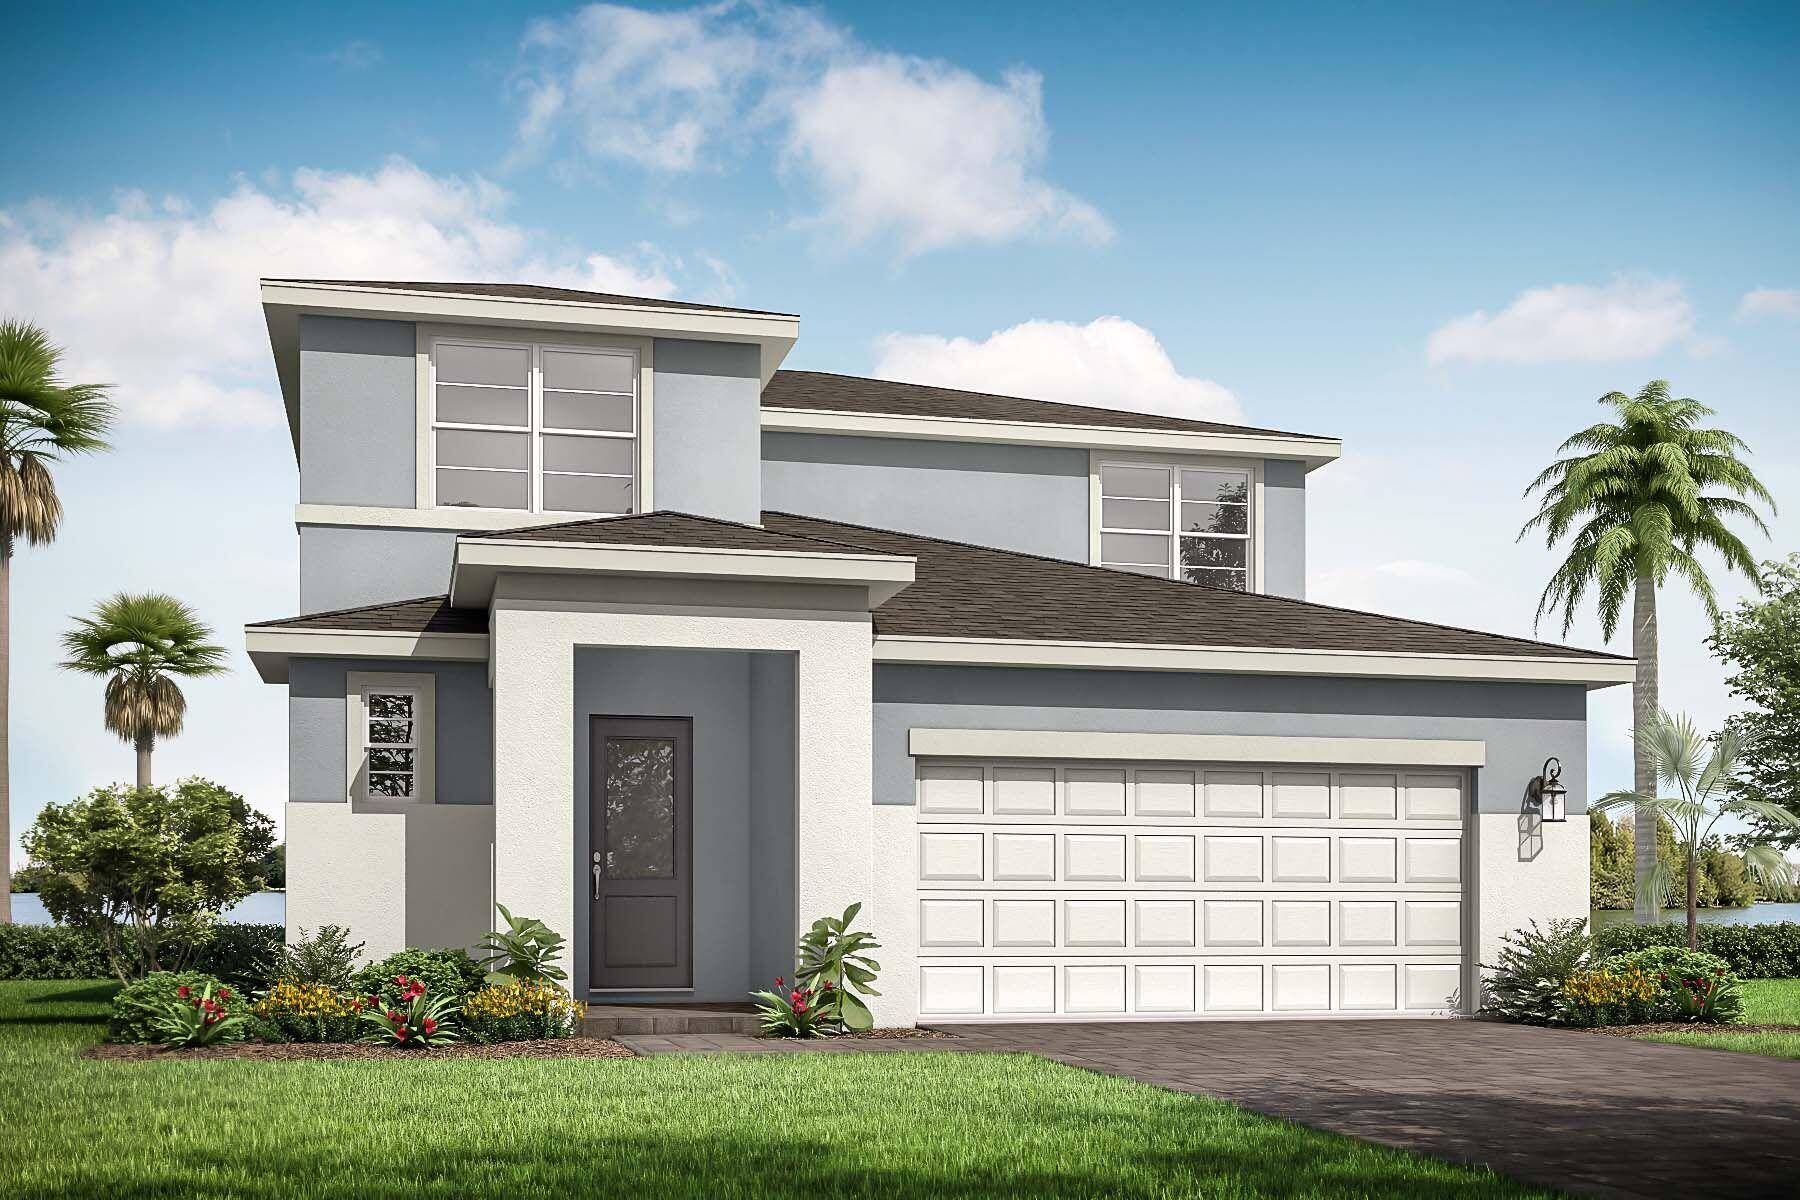 Located in the master planned community Tradition, this Danbury floorplan is the perfect two story home.